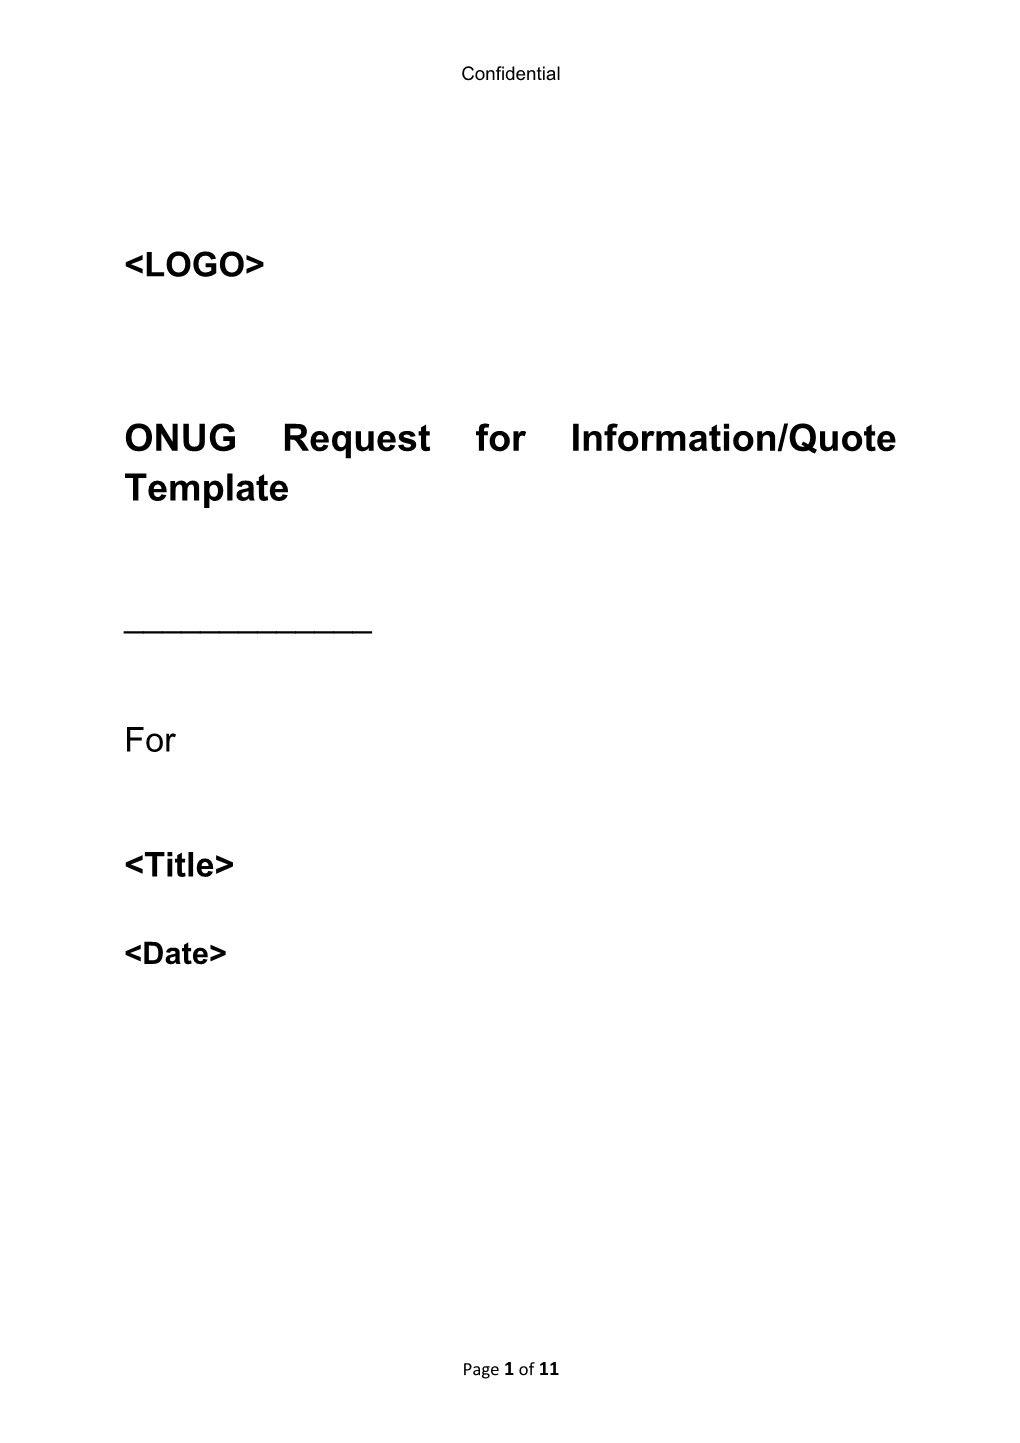 ONUG Request for Information/Quotetemplate